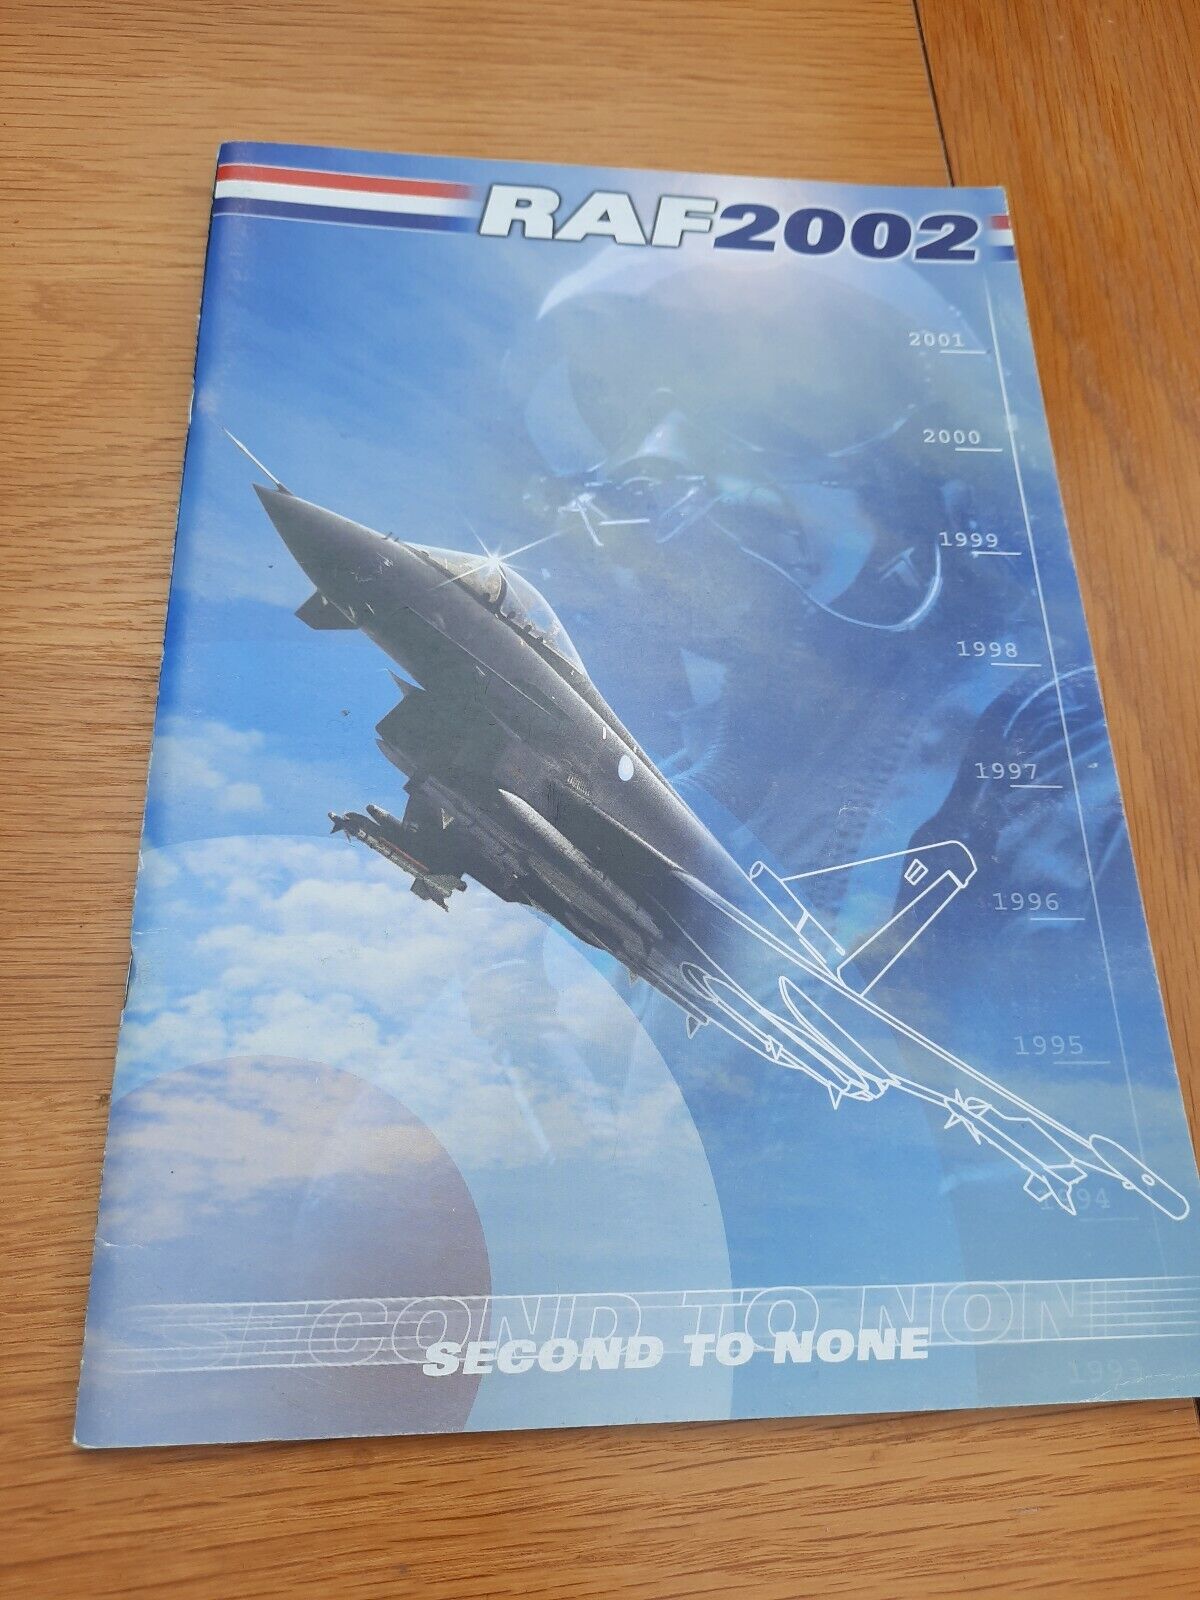 RAF SECOND TO NONE ROYAL AIR FORCE RECRUITMENT BOOK MINISTRY OF DEFENCE 2002 MOD